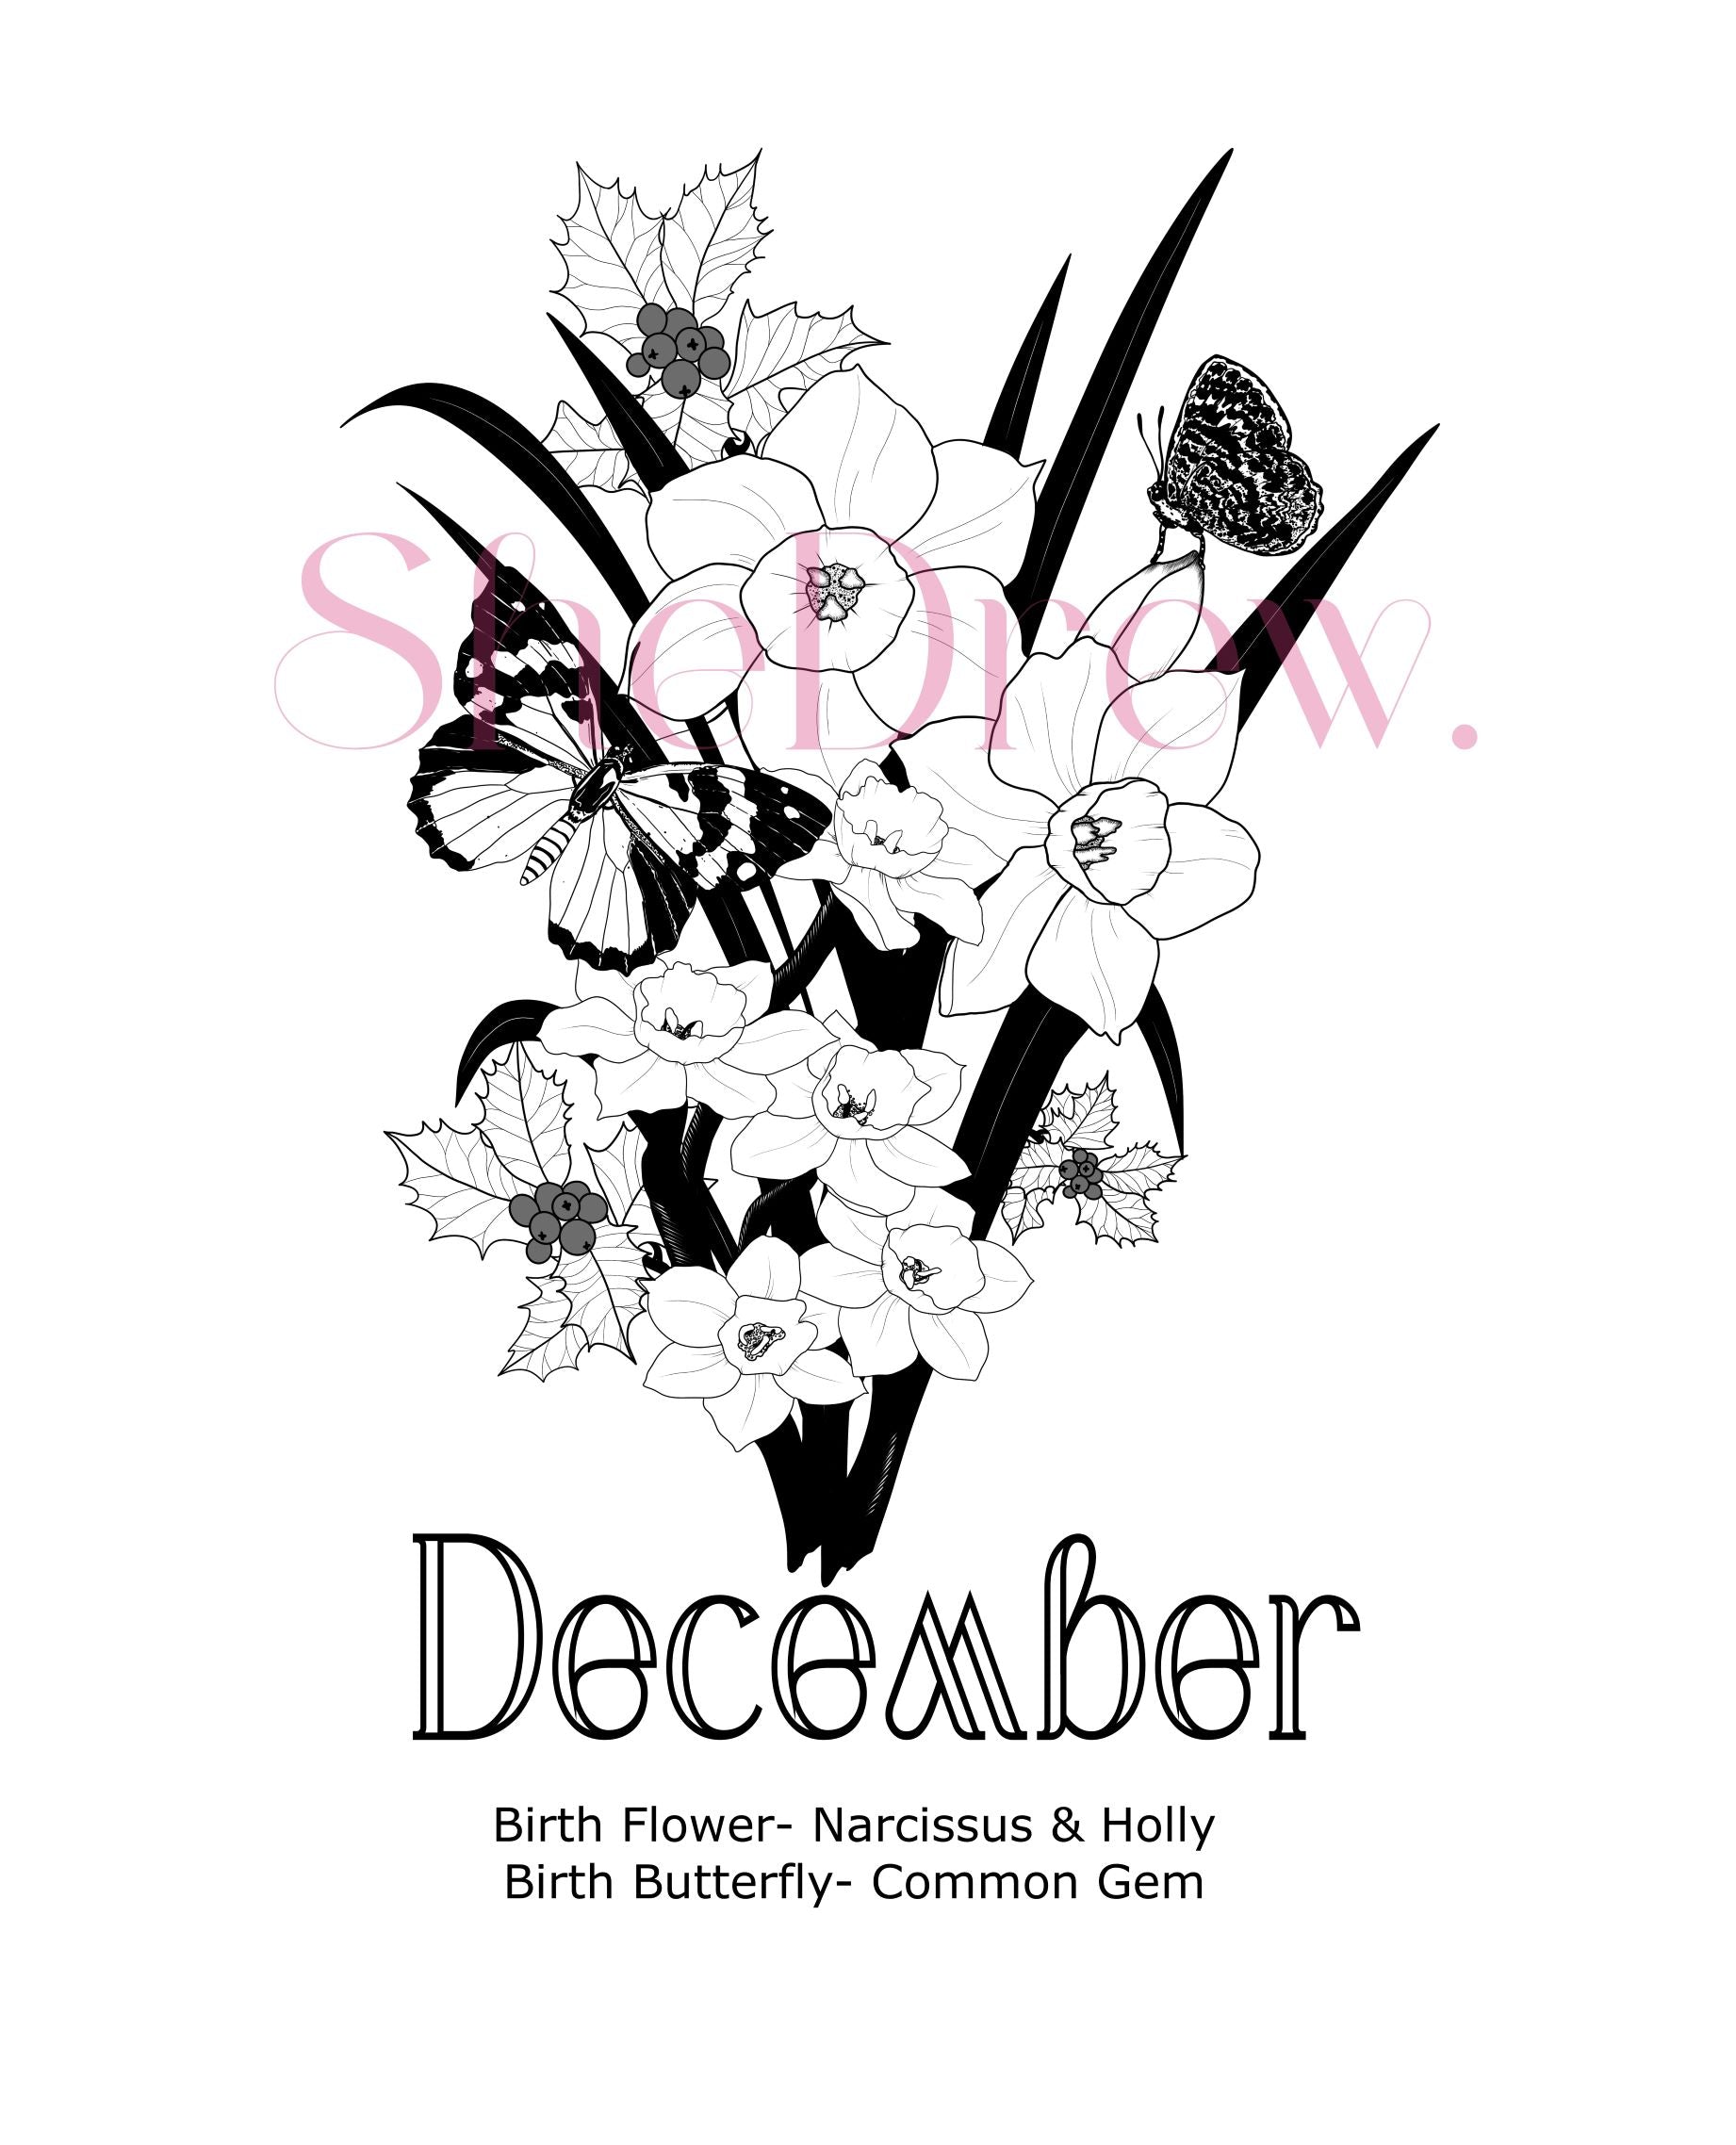 December Birth Month Flowers & Butterfly